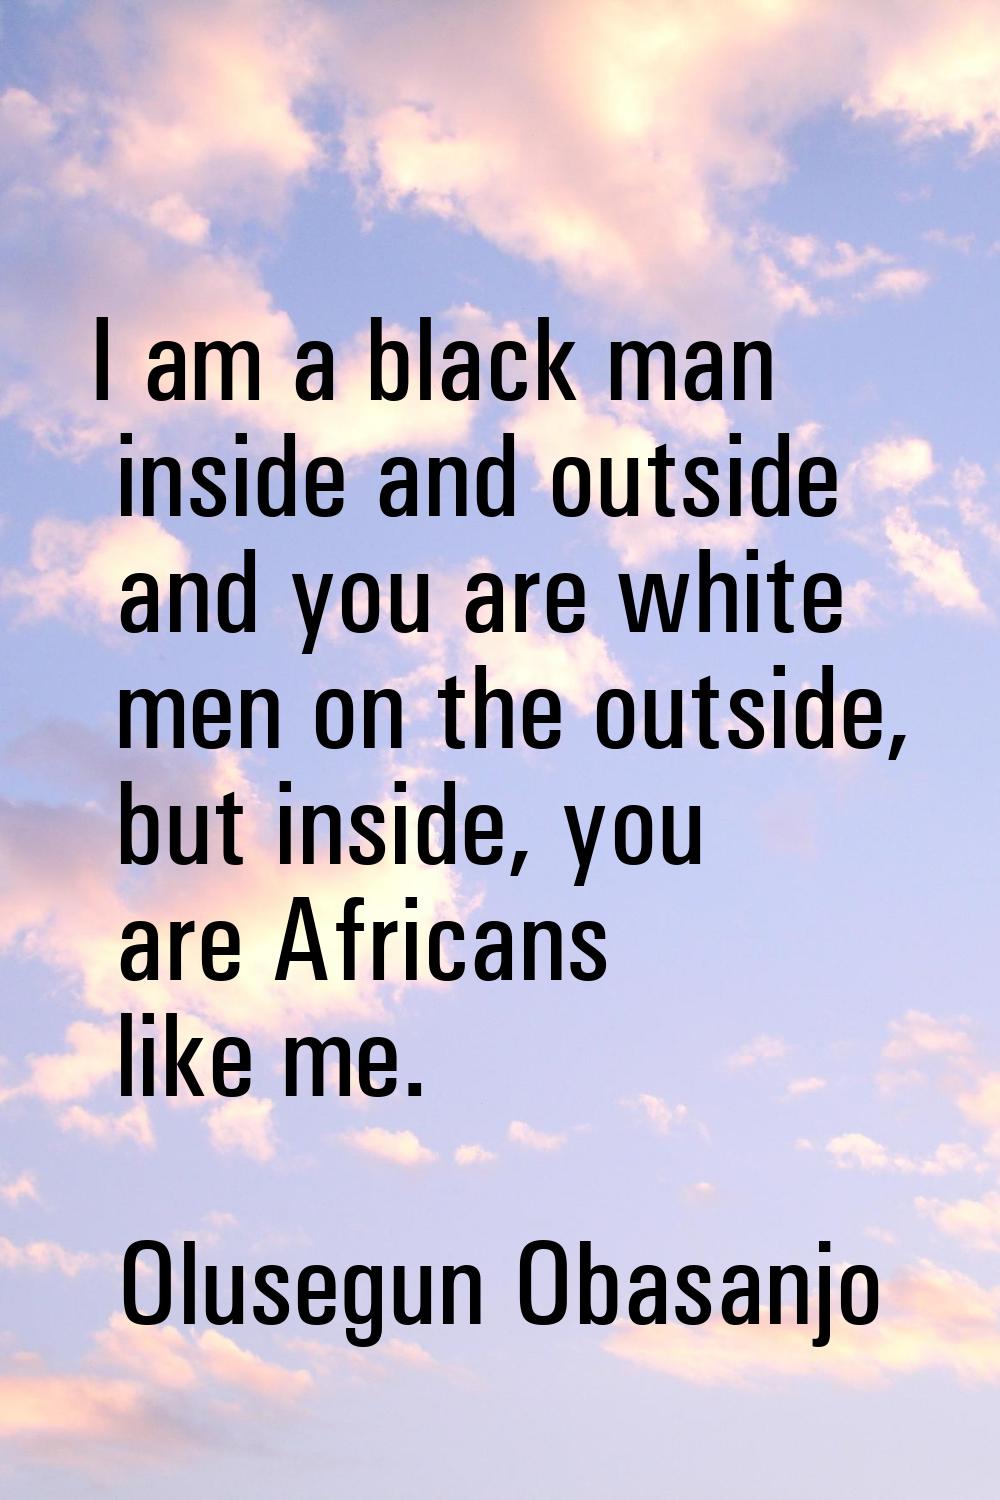 I am a black man inside and outside and you are white men on the outside, but inside, you are Afric